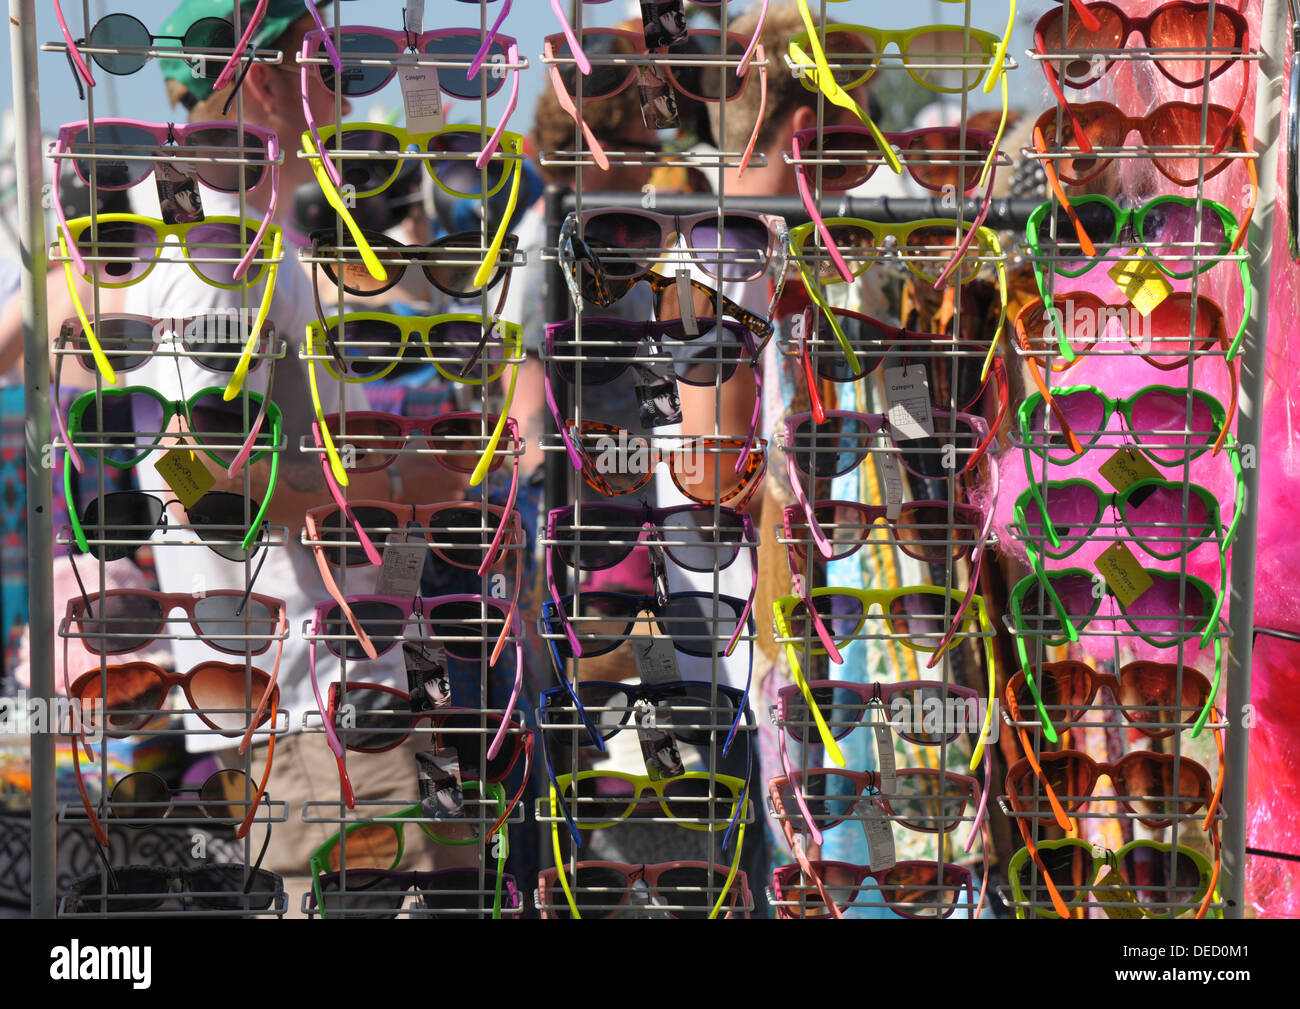 A market stall display of multicolour sunglasses. Stock Photo